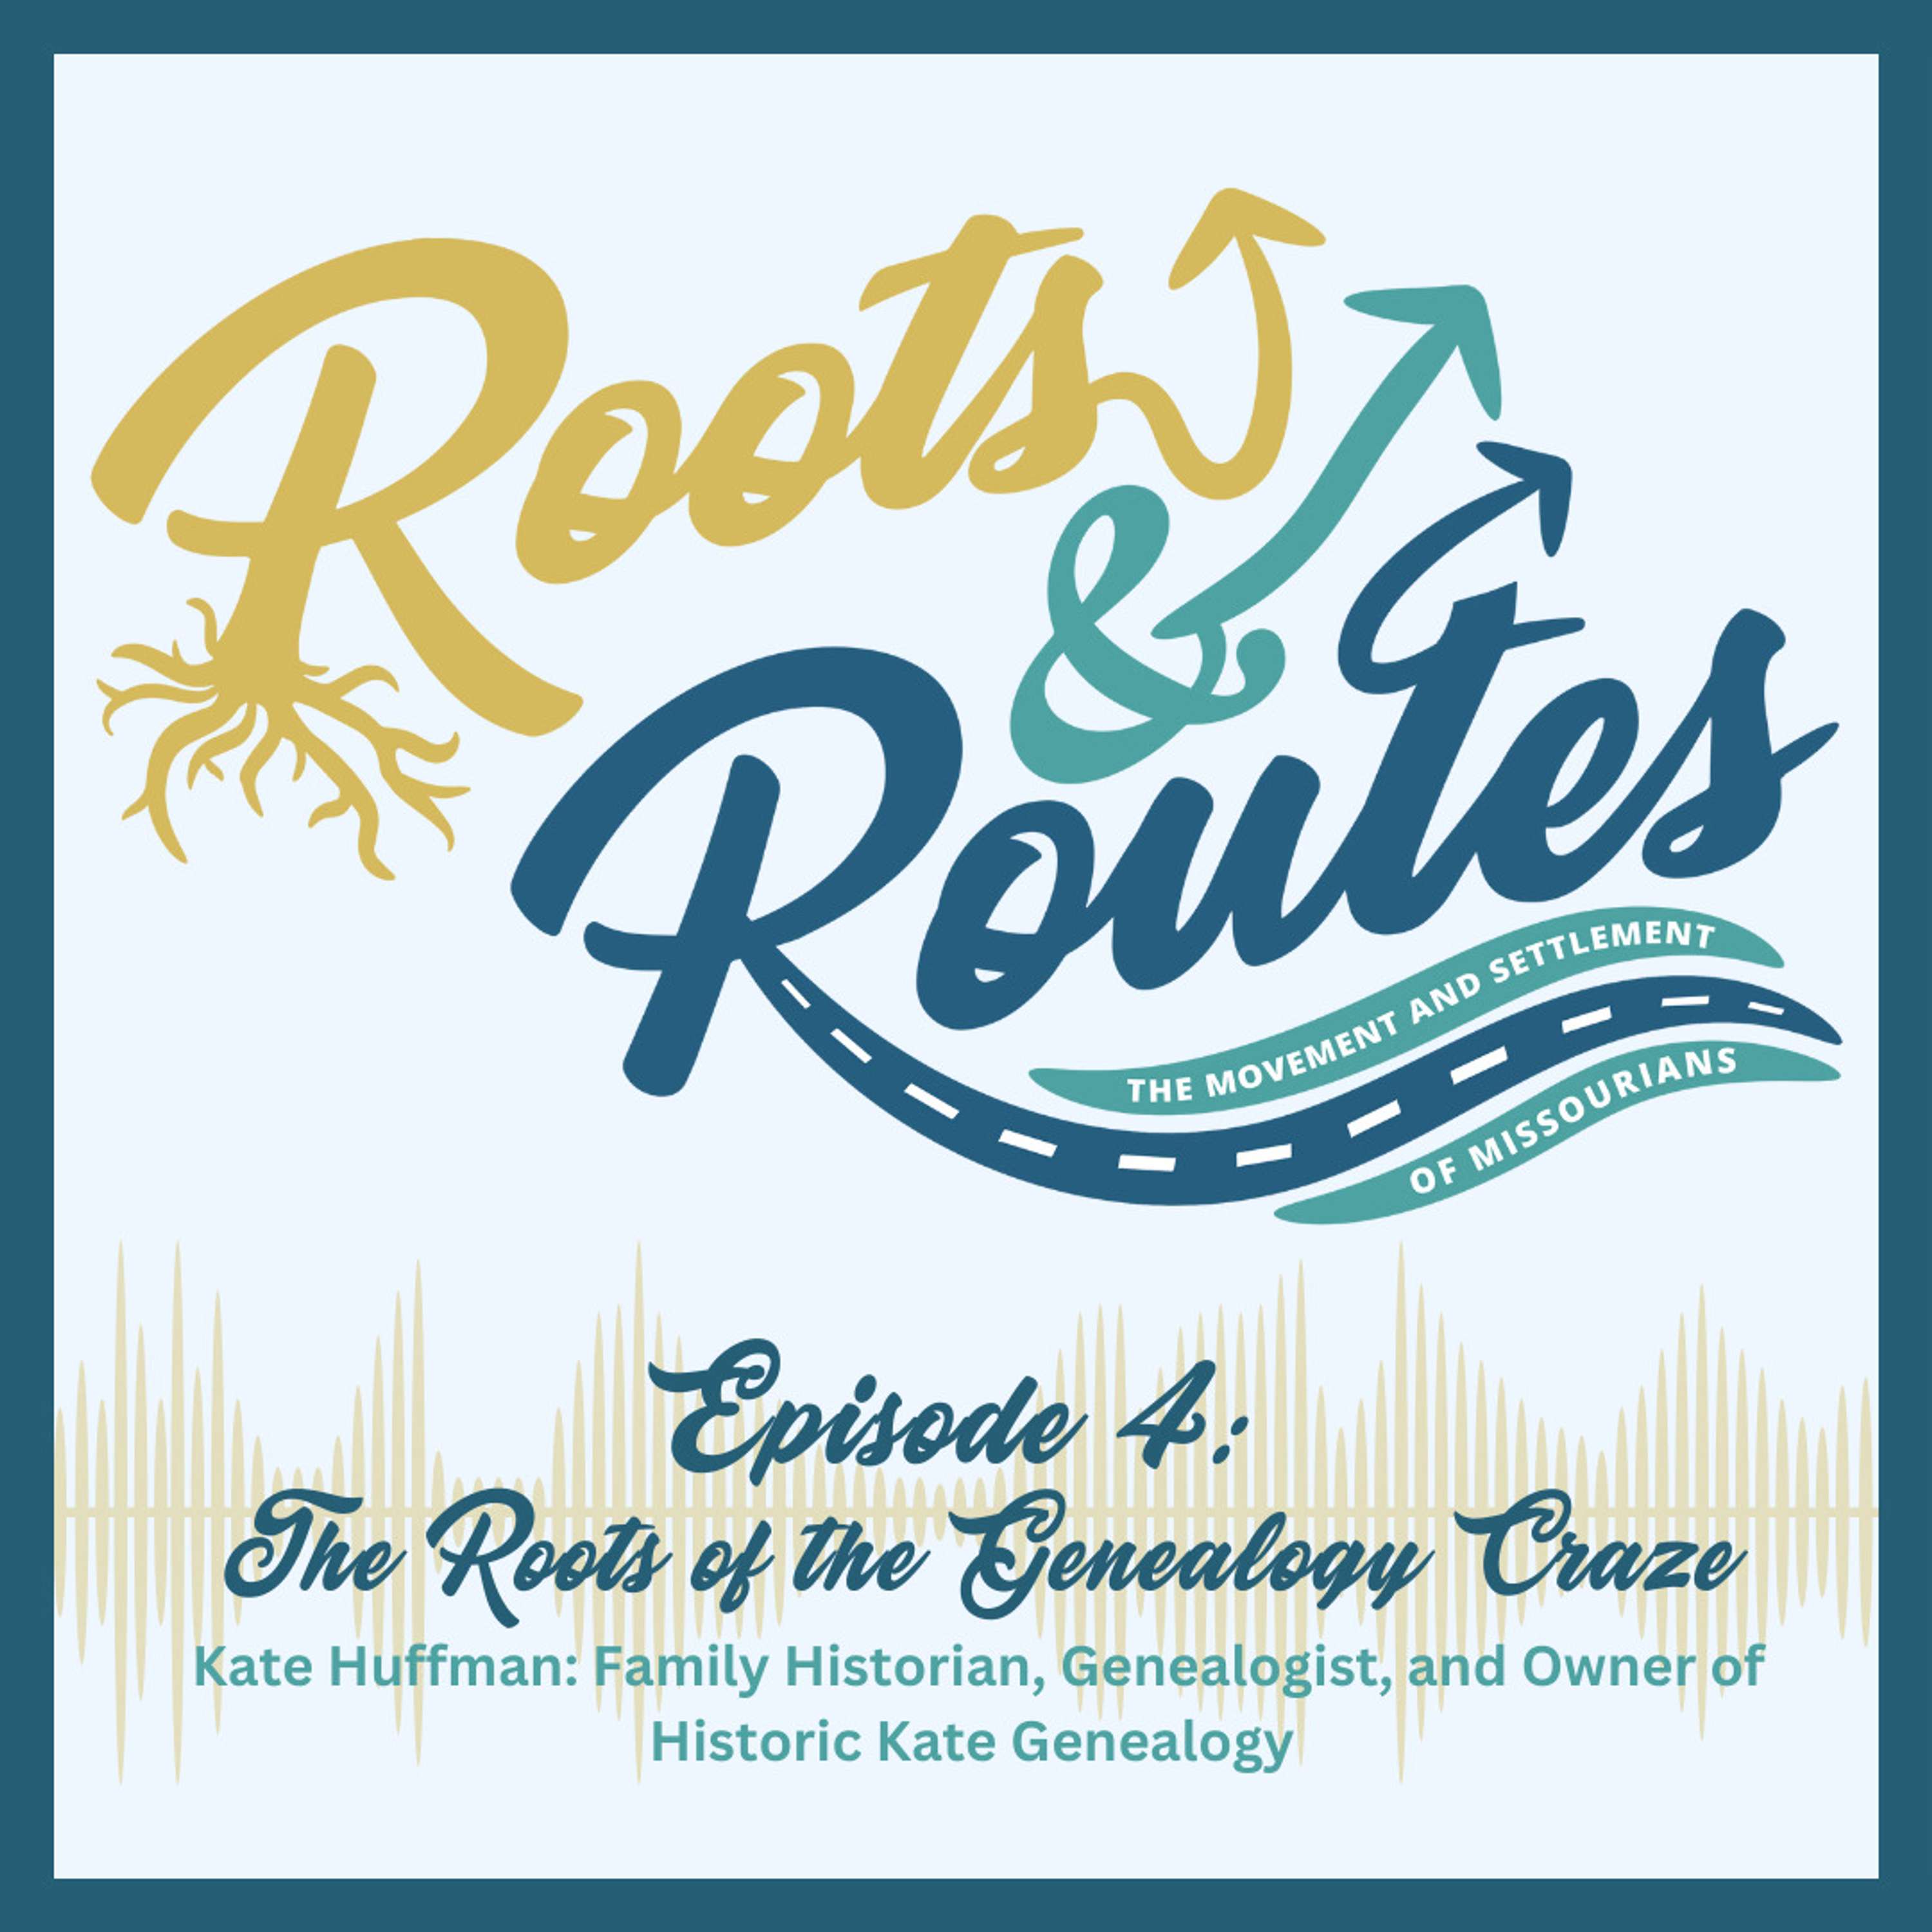 S2 E4: The Roots of the Genealogy Craze